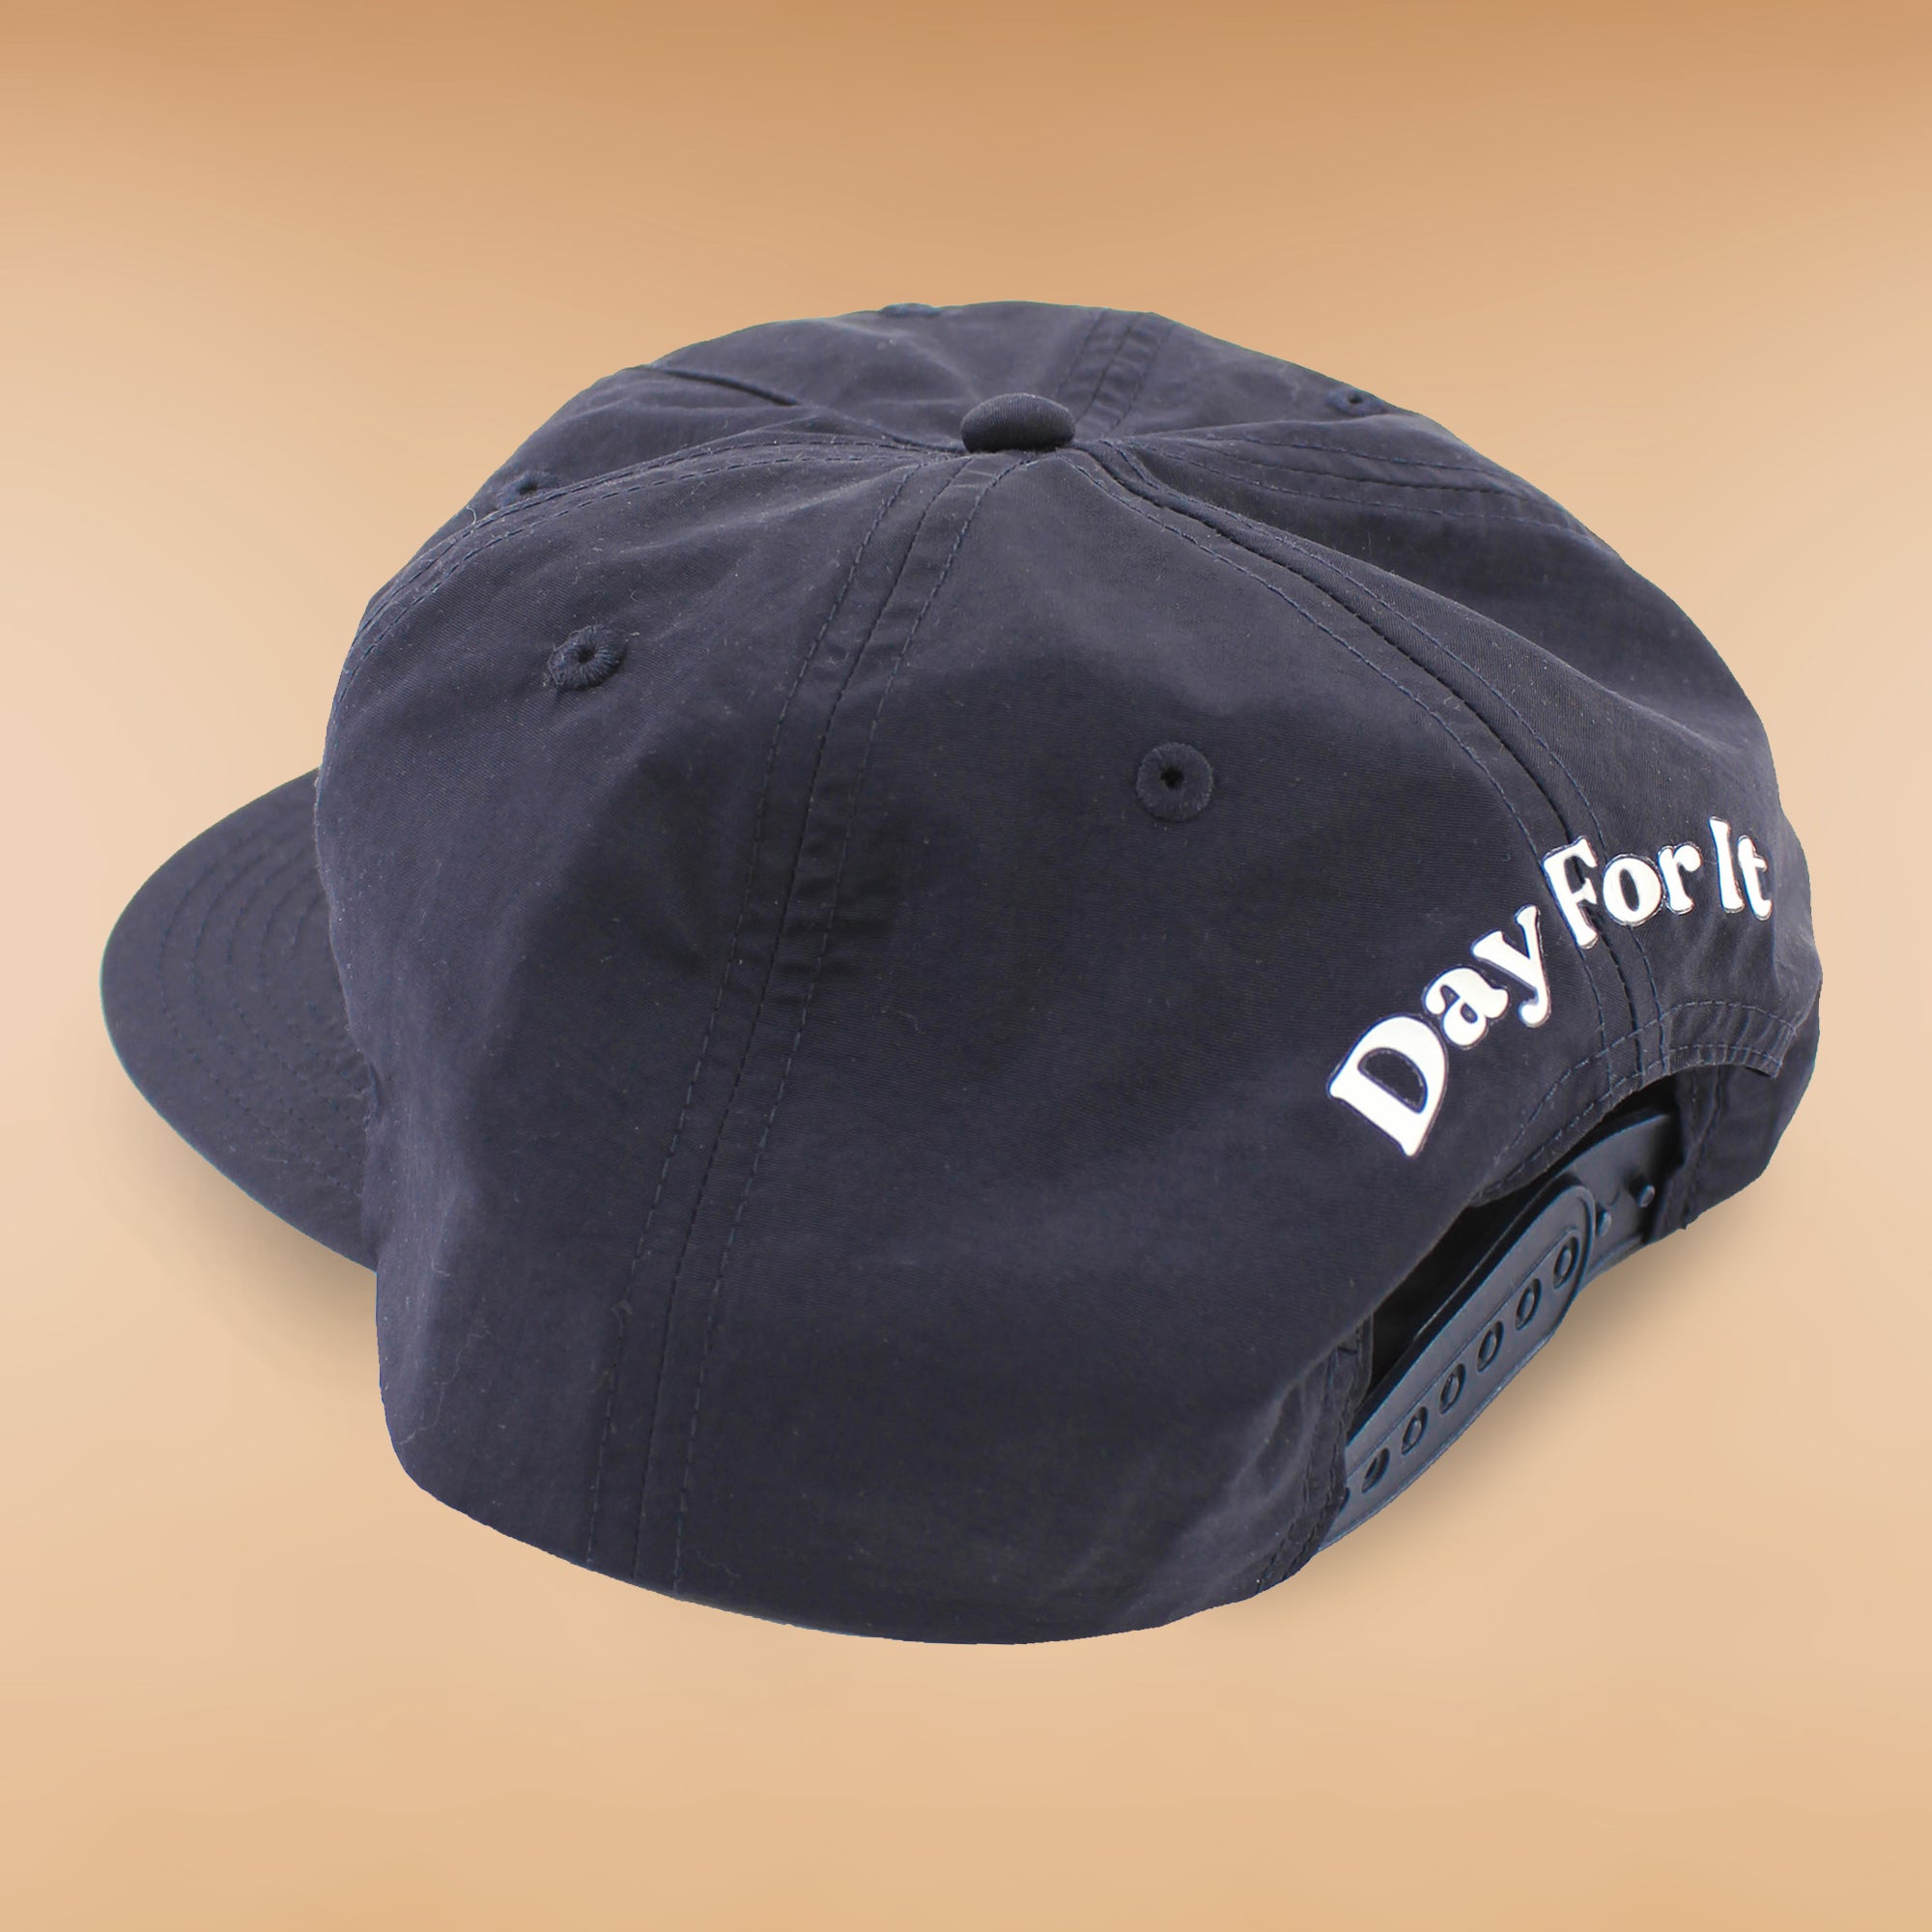 Better Beer Navy Surf Cap features Day For It back view - Better Beer